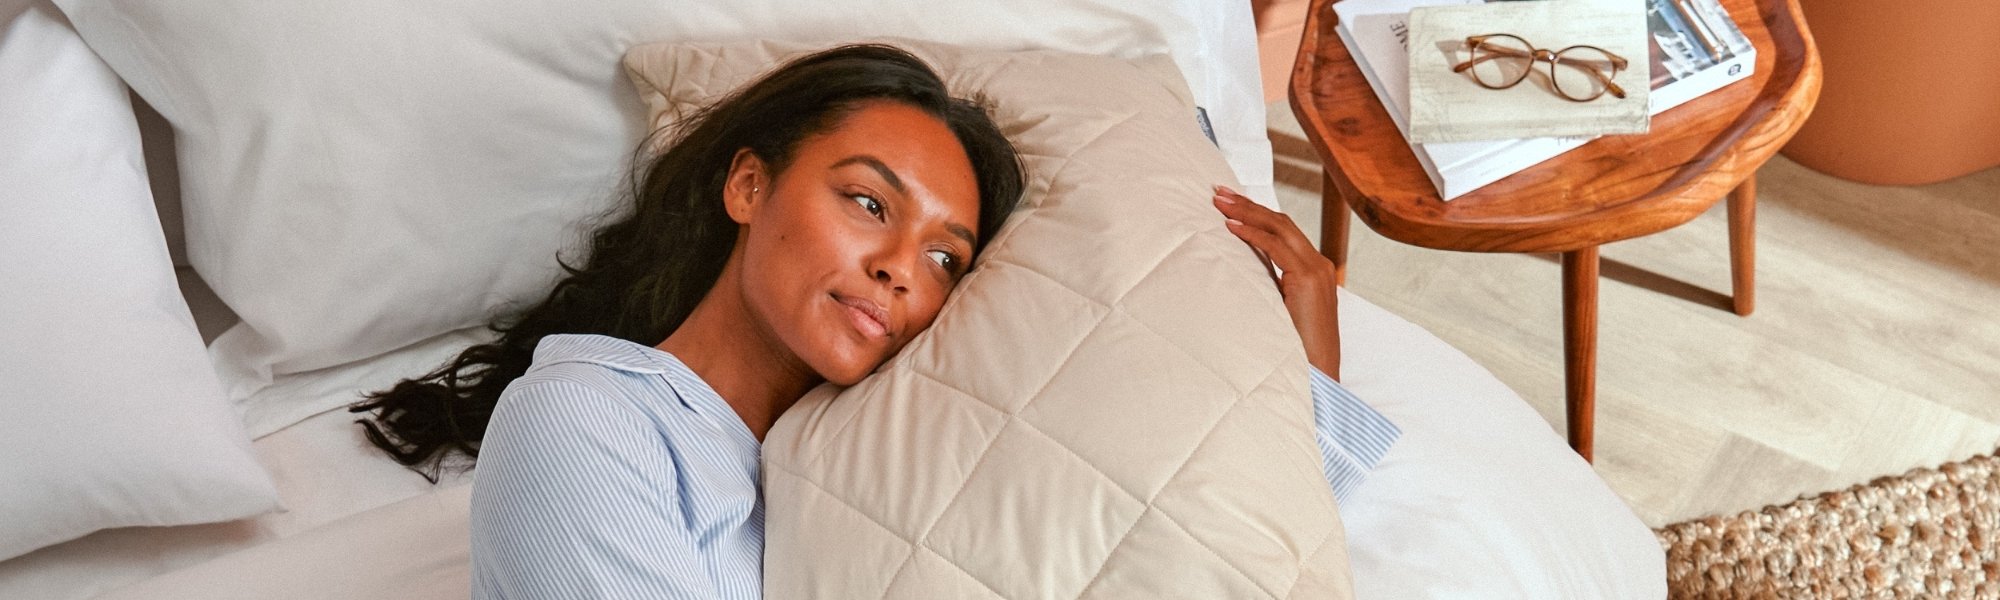 How to Sleep When You Have a Cold or the Flu